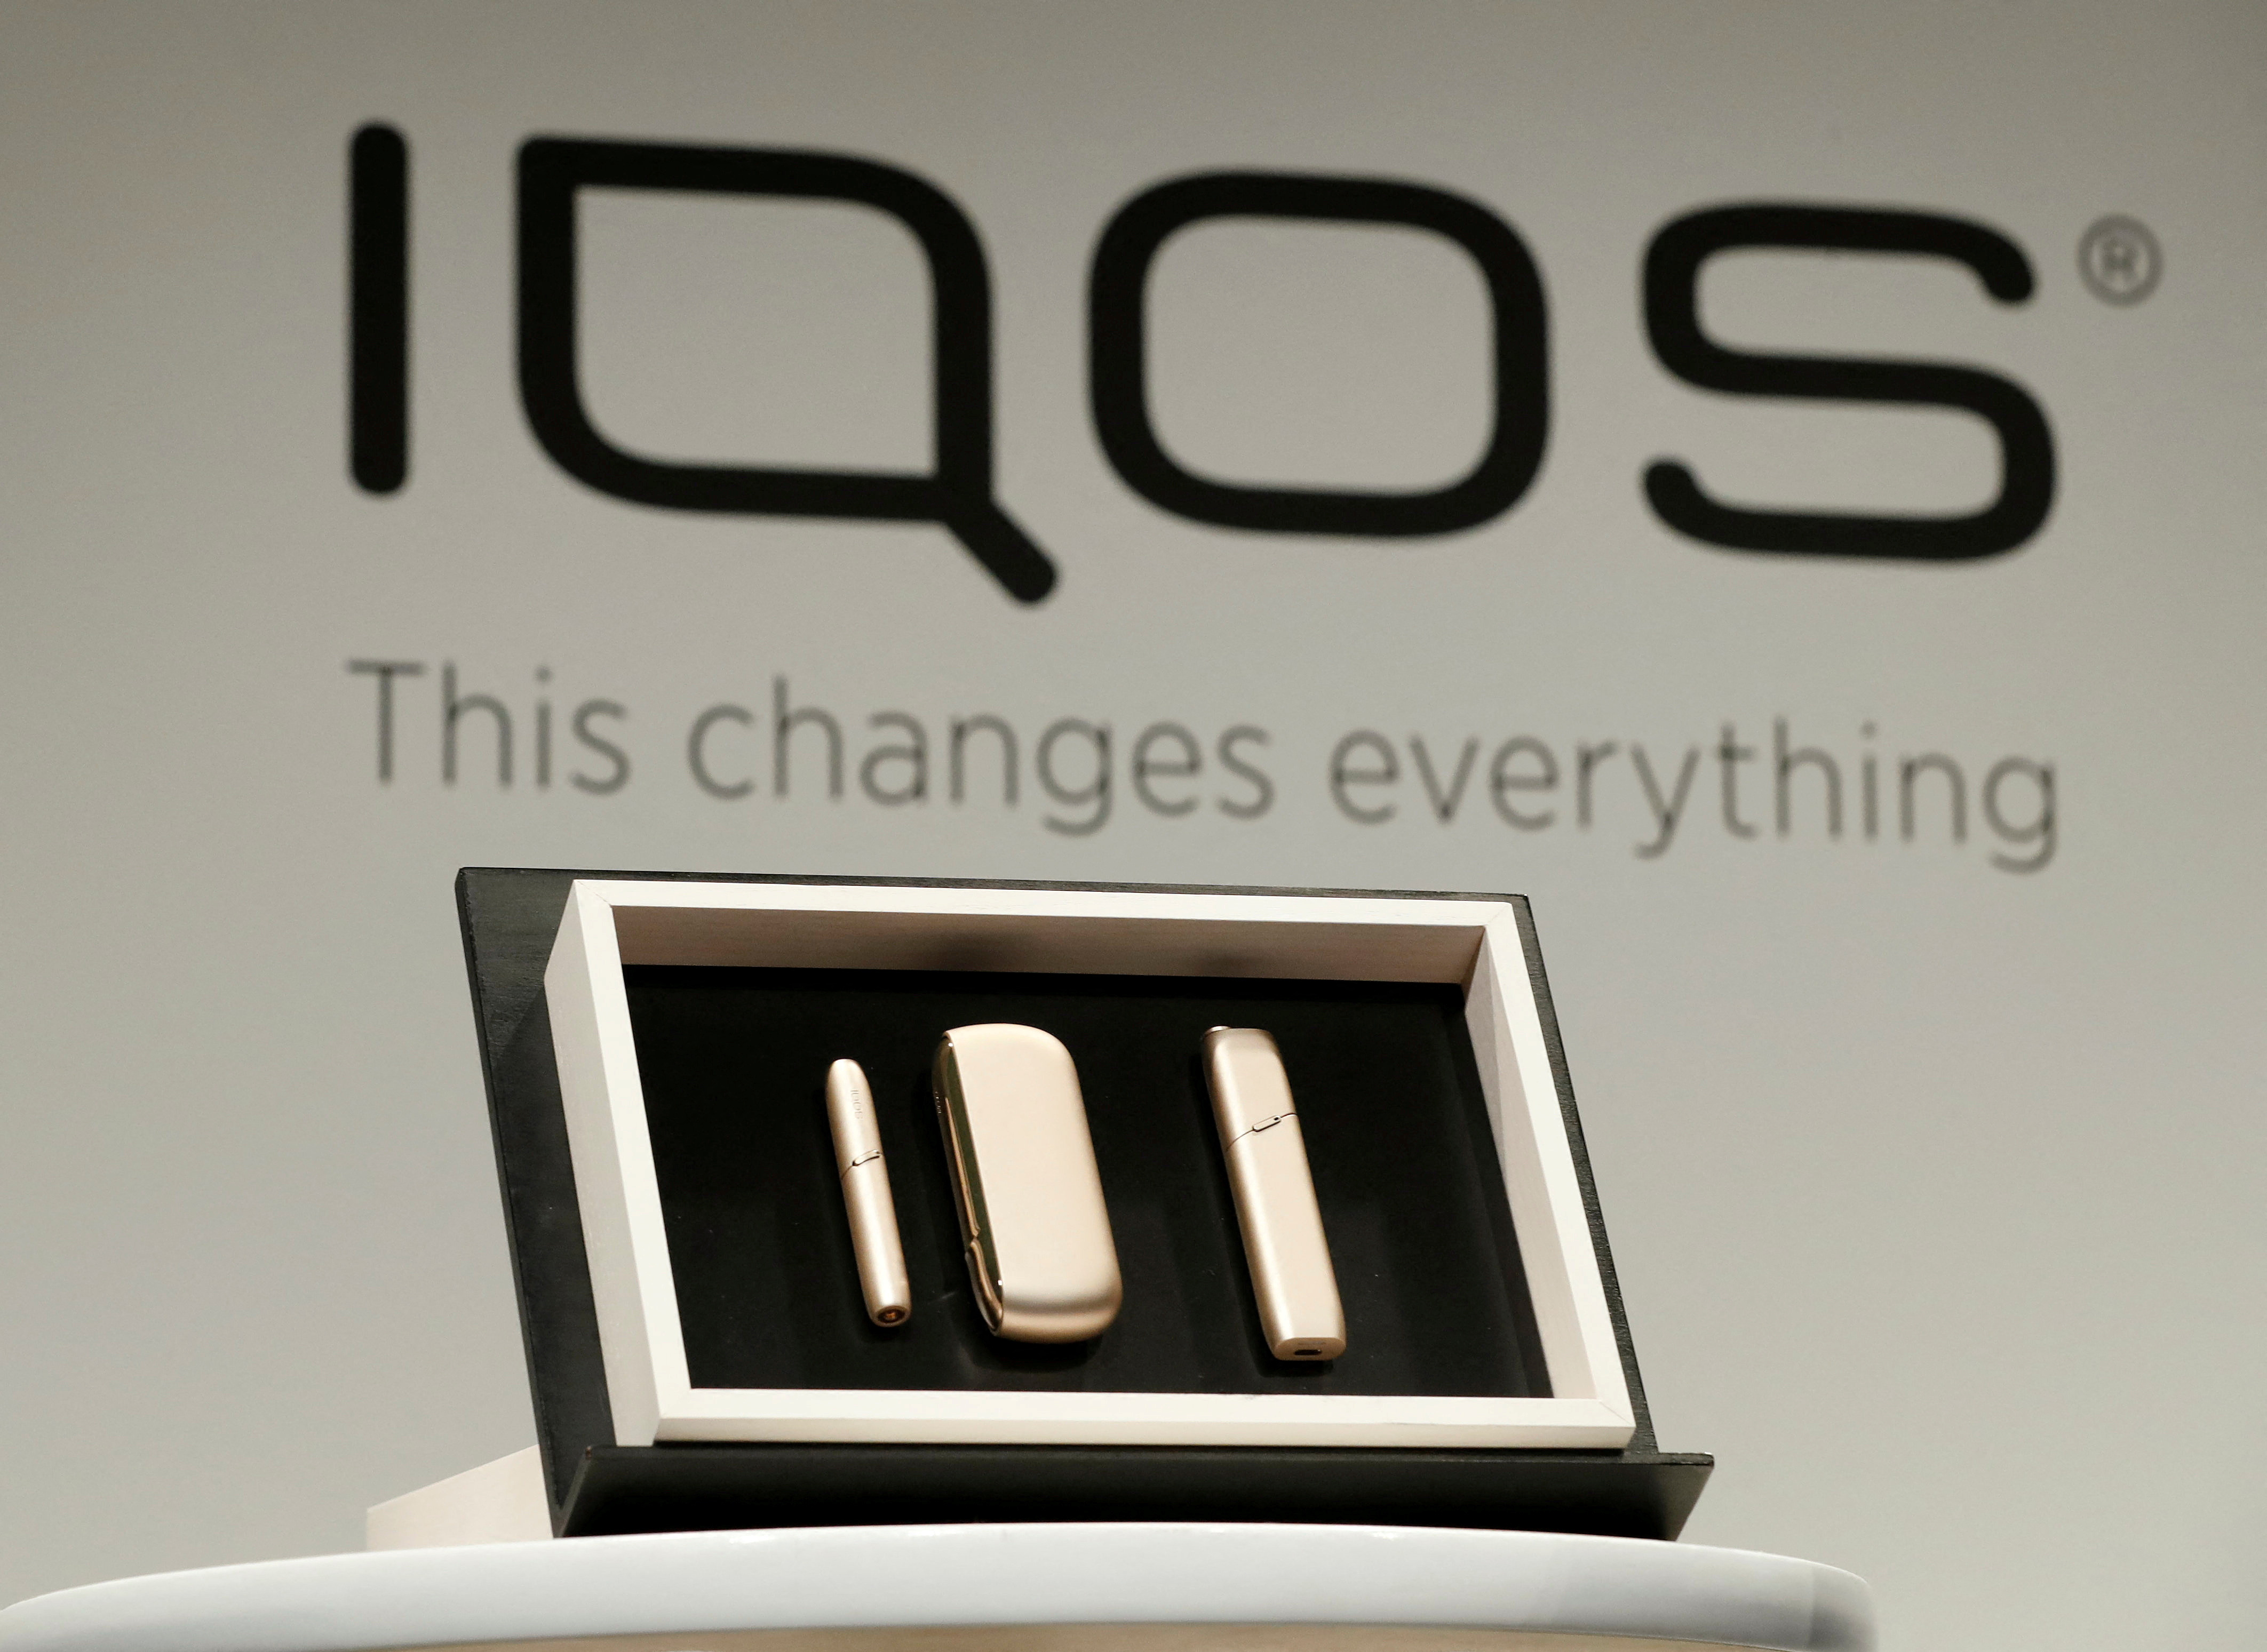 Philip Morris new IQOS 3 devices are displayed during a news conference by its International's CEO Andre Calantzopoulos in Tokyo